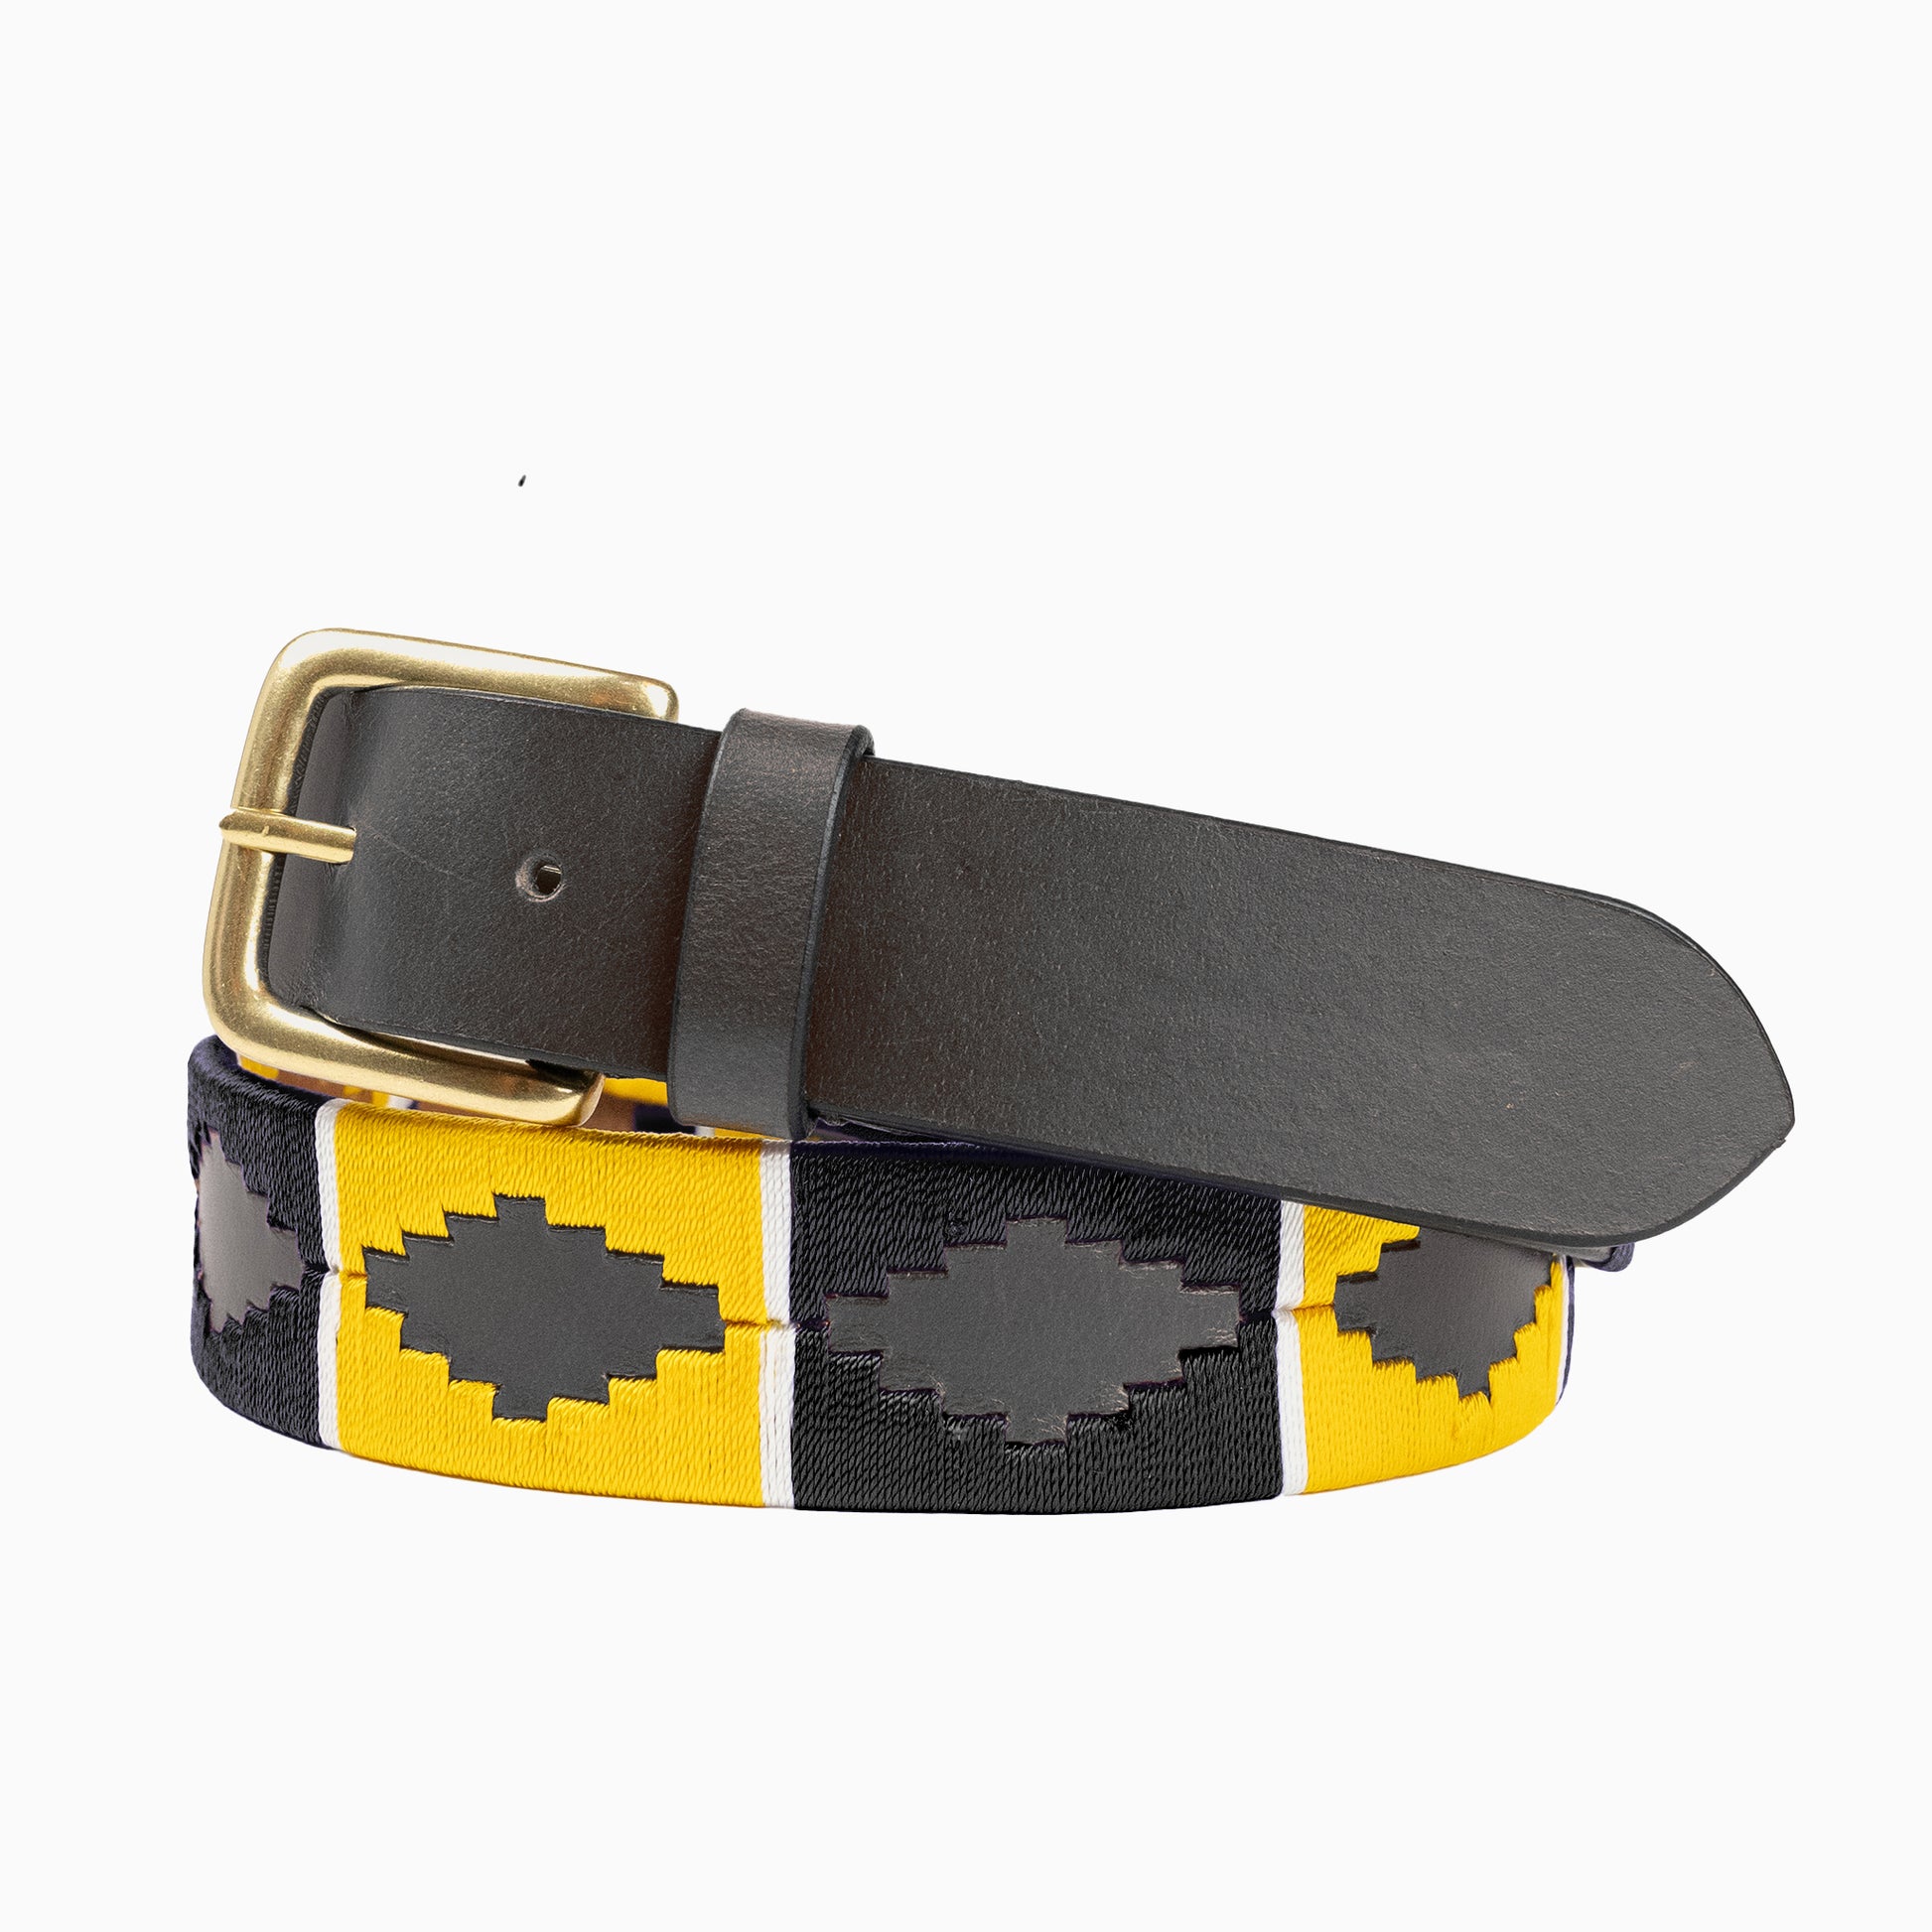 Black and yellow belt for men 